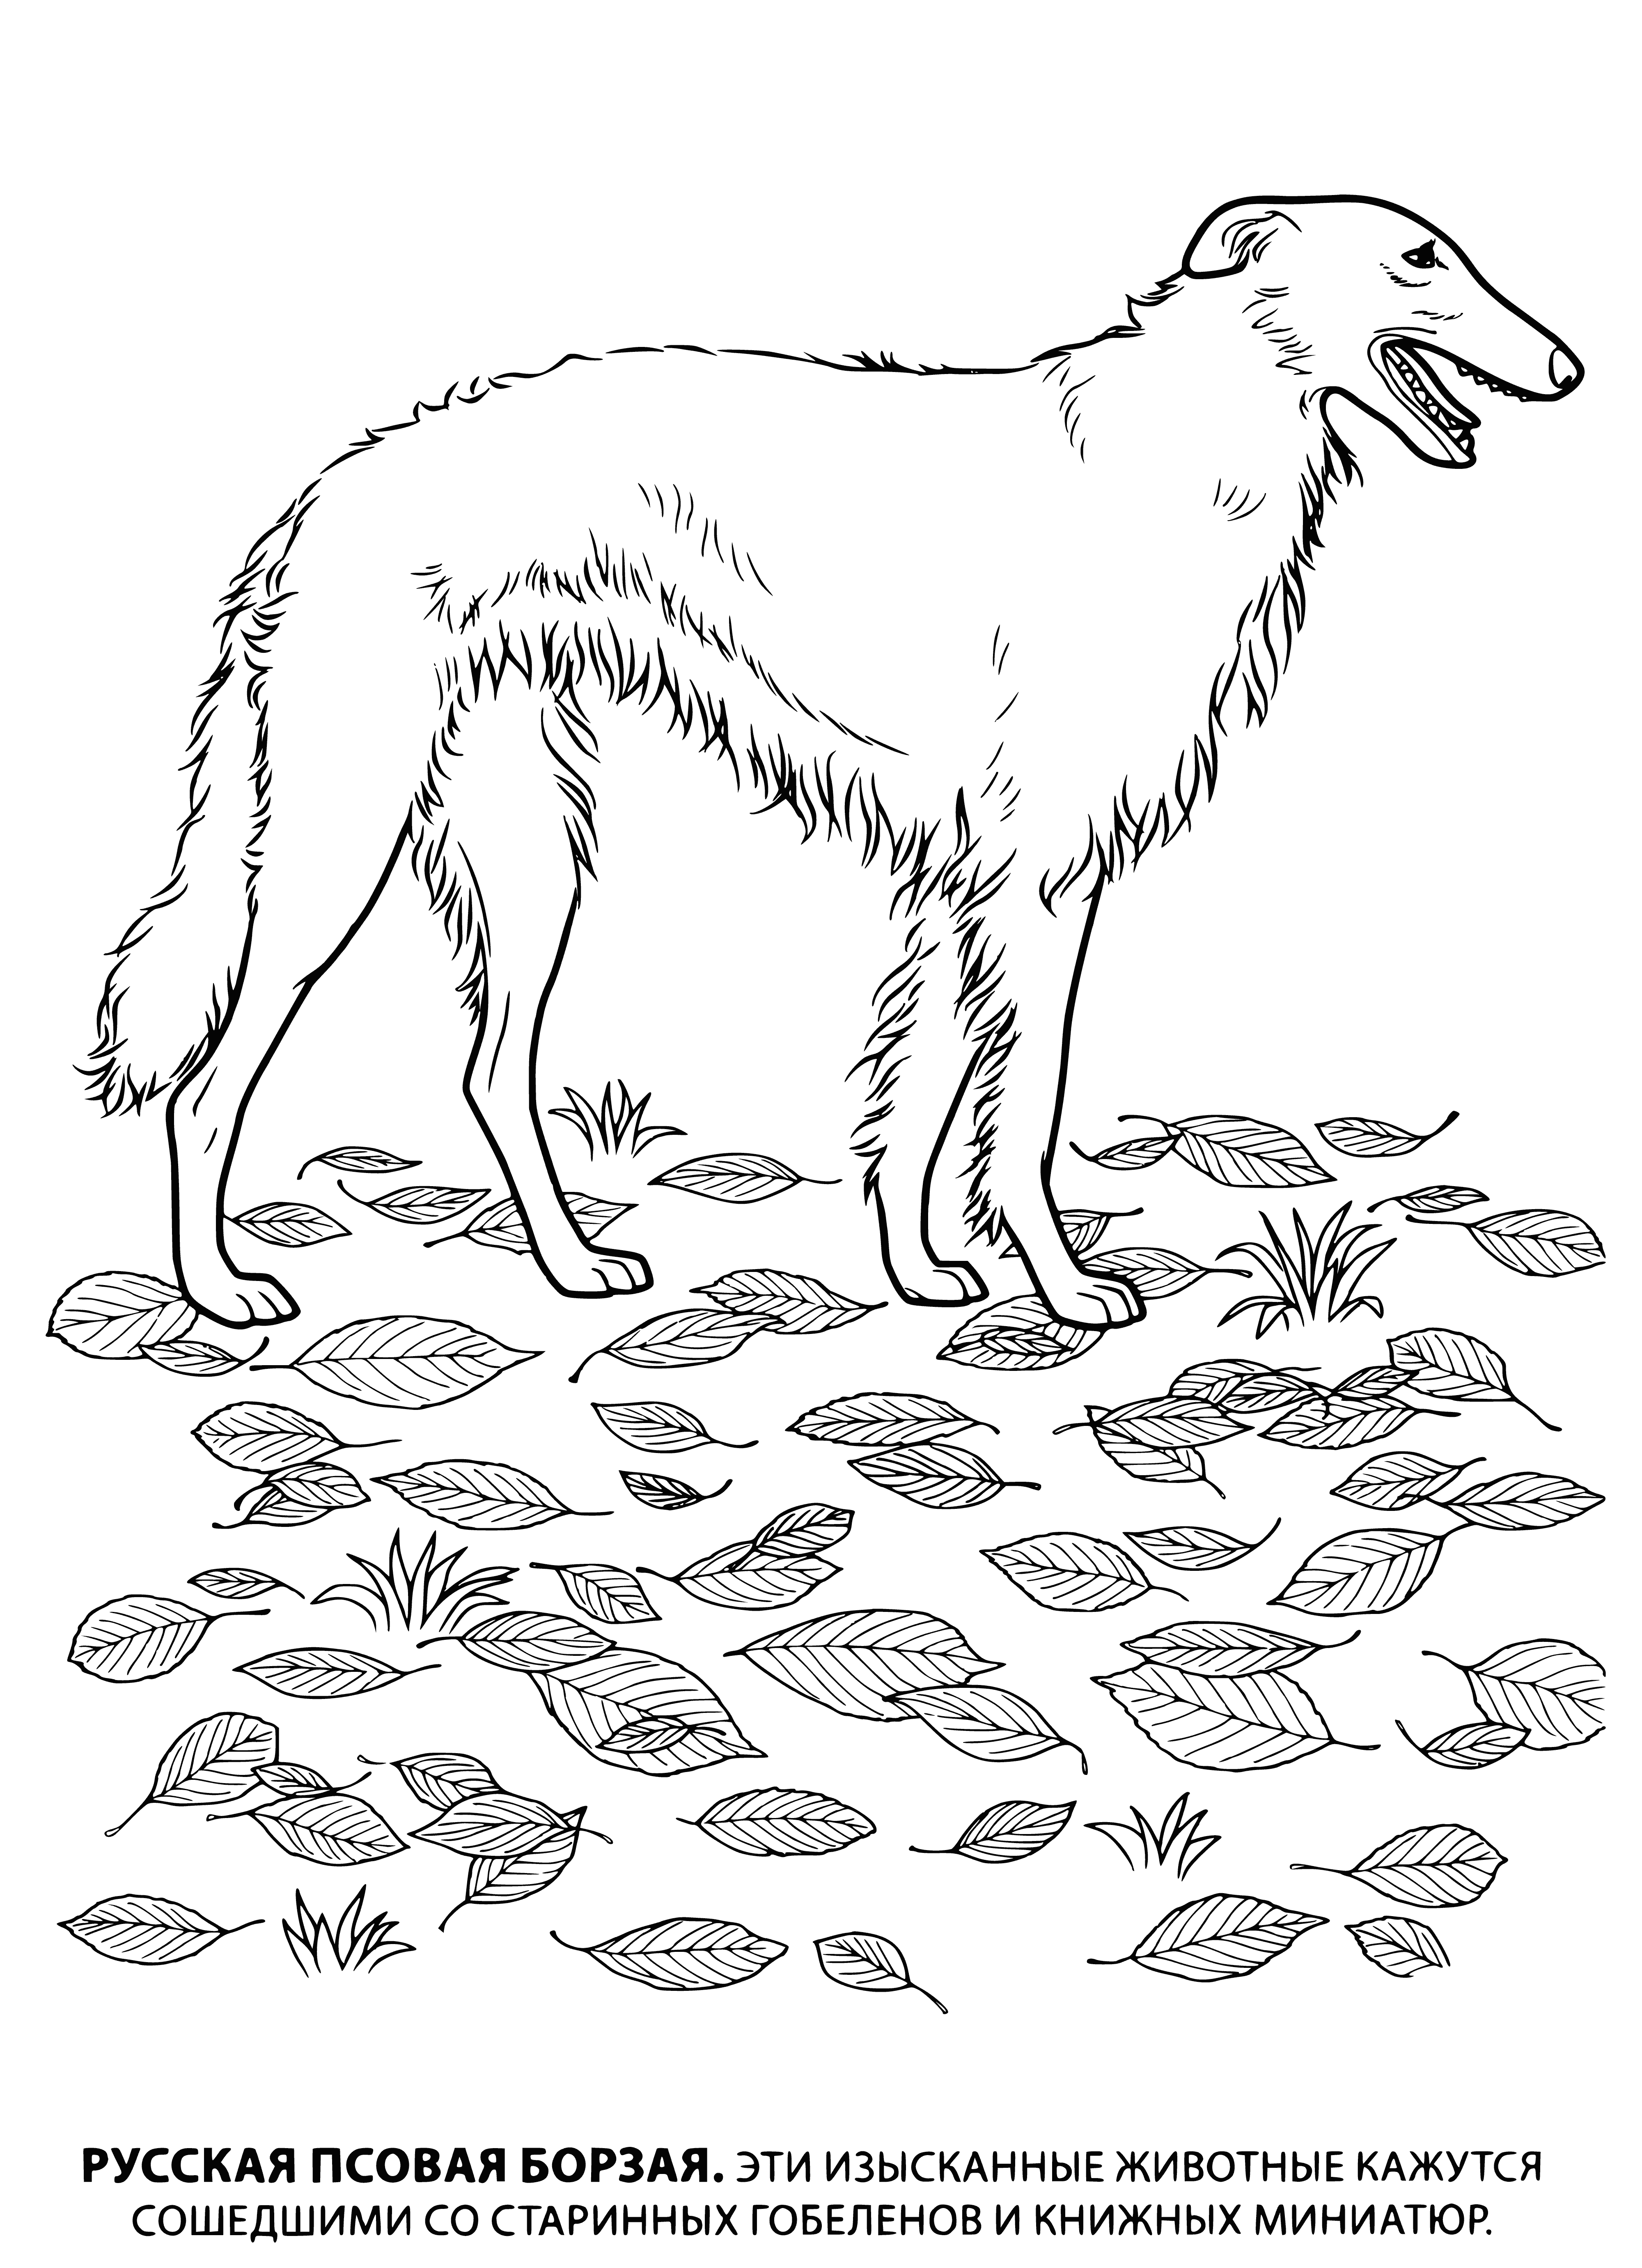 Russian-hound sighthound coloring page